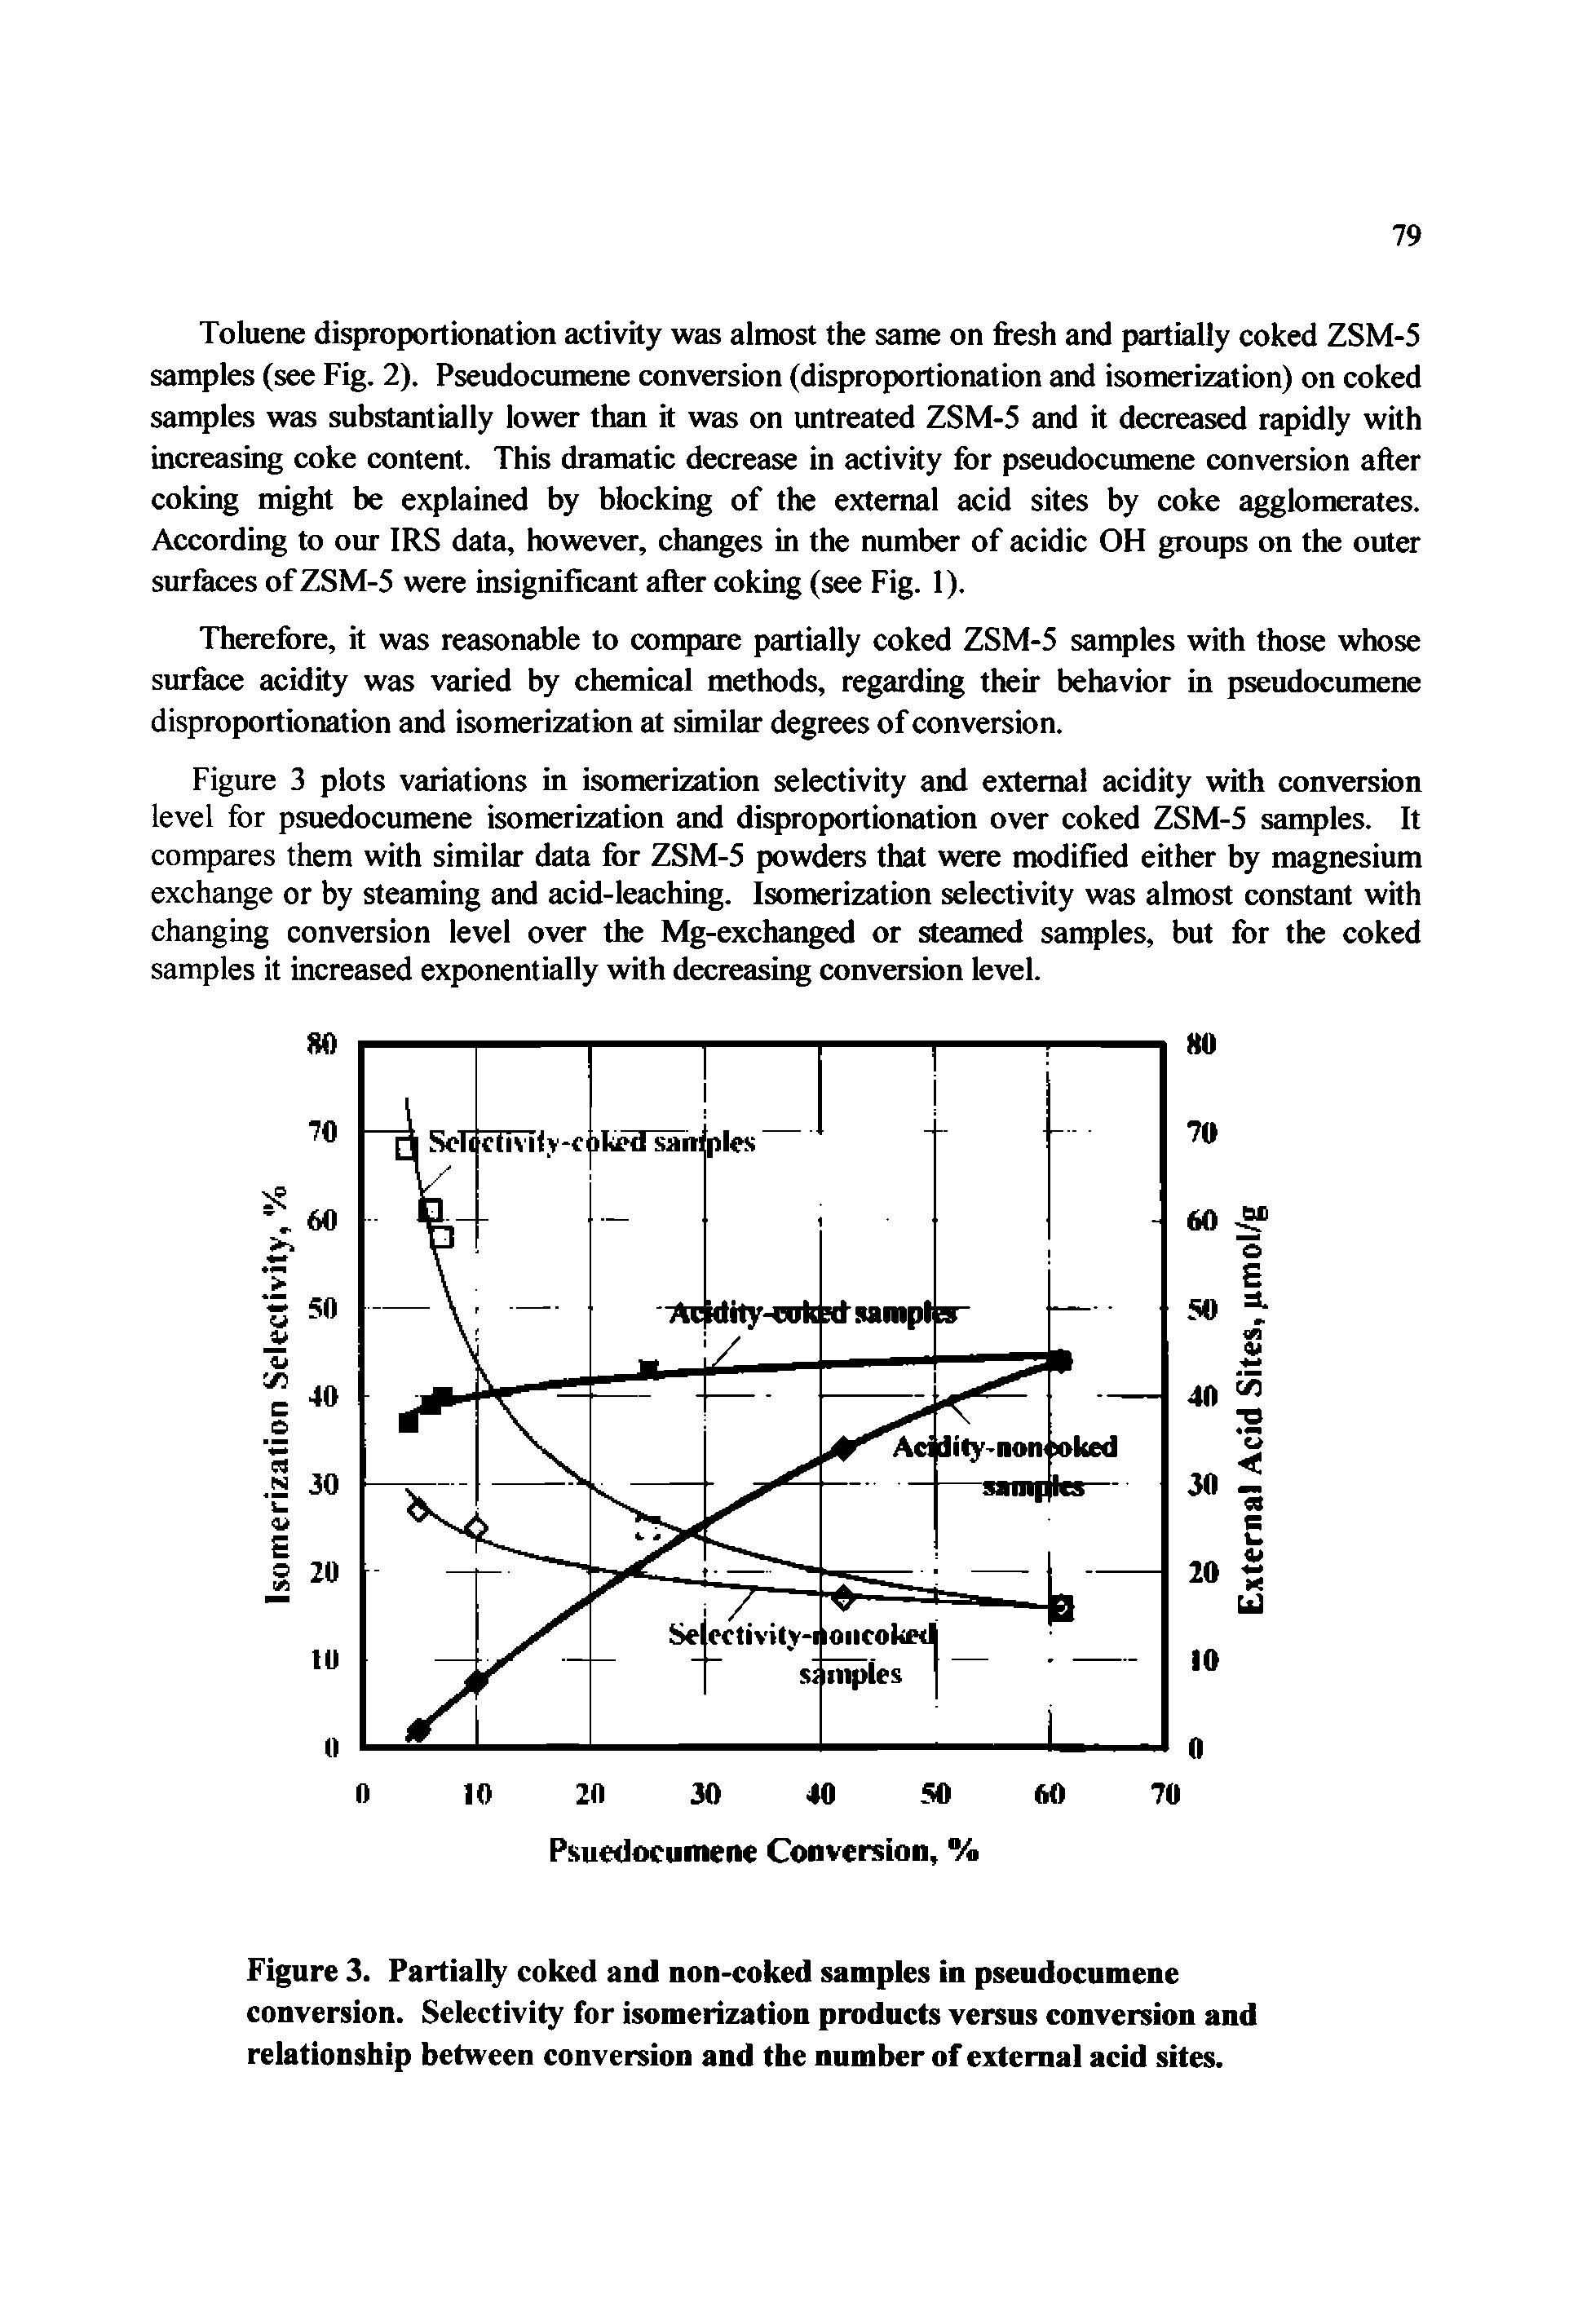 Figure 3. Partially coked and non-coked samples in pseudocumene conversion. Selectivity for isomerization products versus conversion and relationship between conversion and the number of external acid sites.